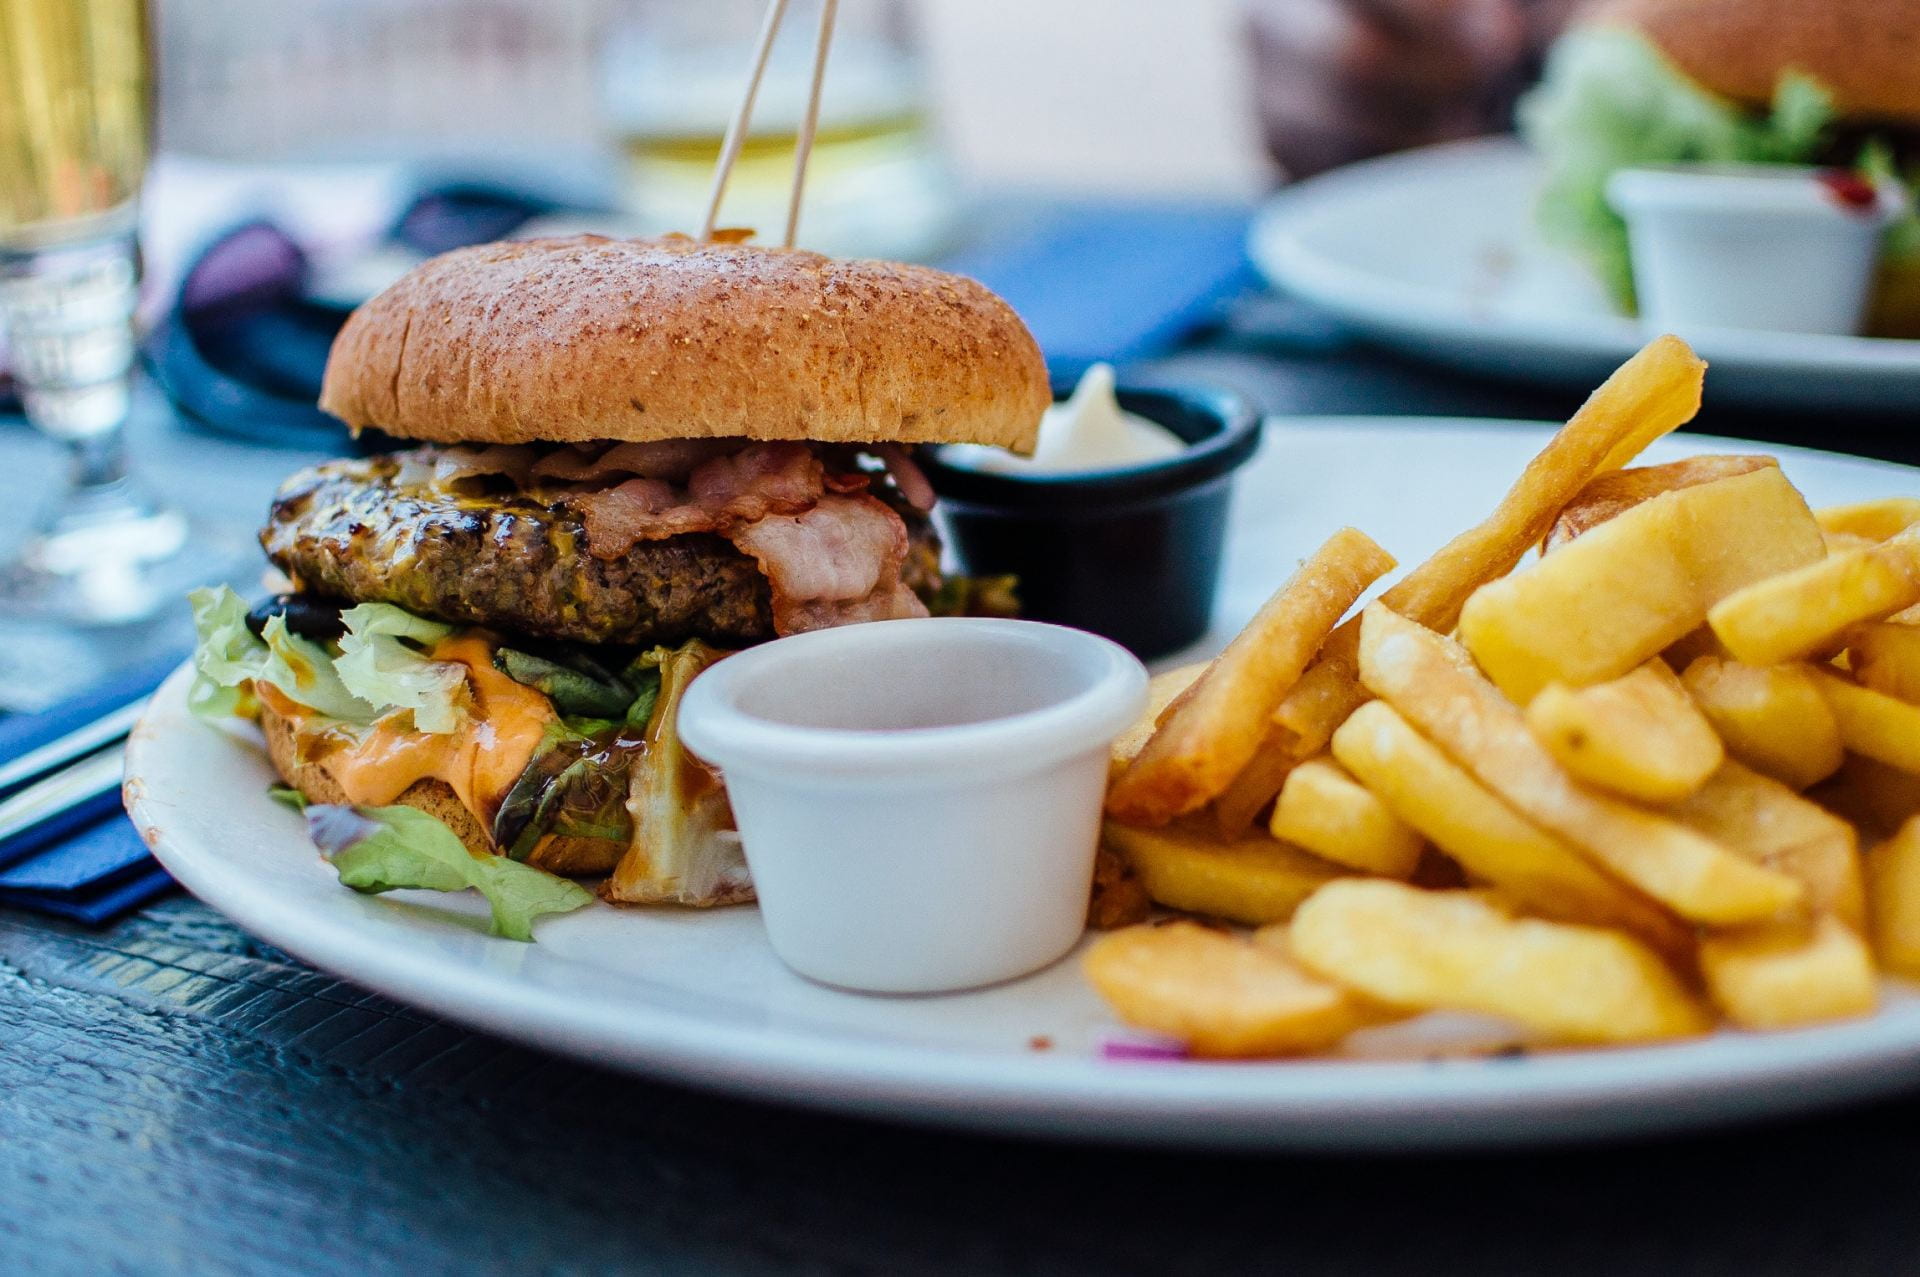 A plate of burger and chips to reward yourself with.